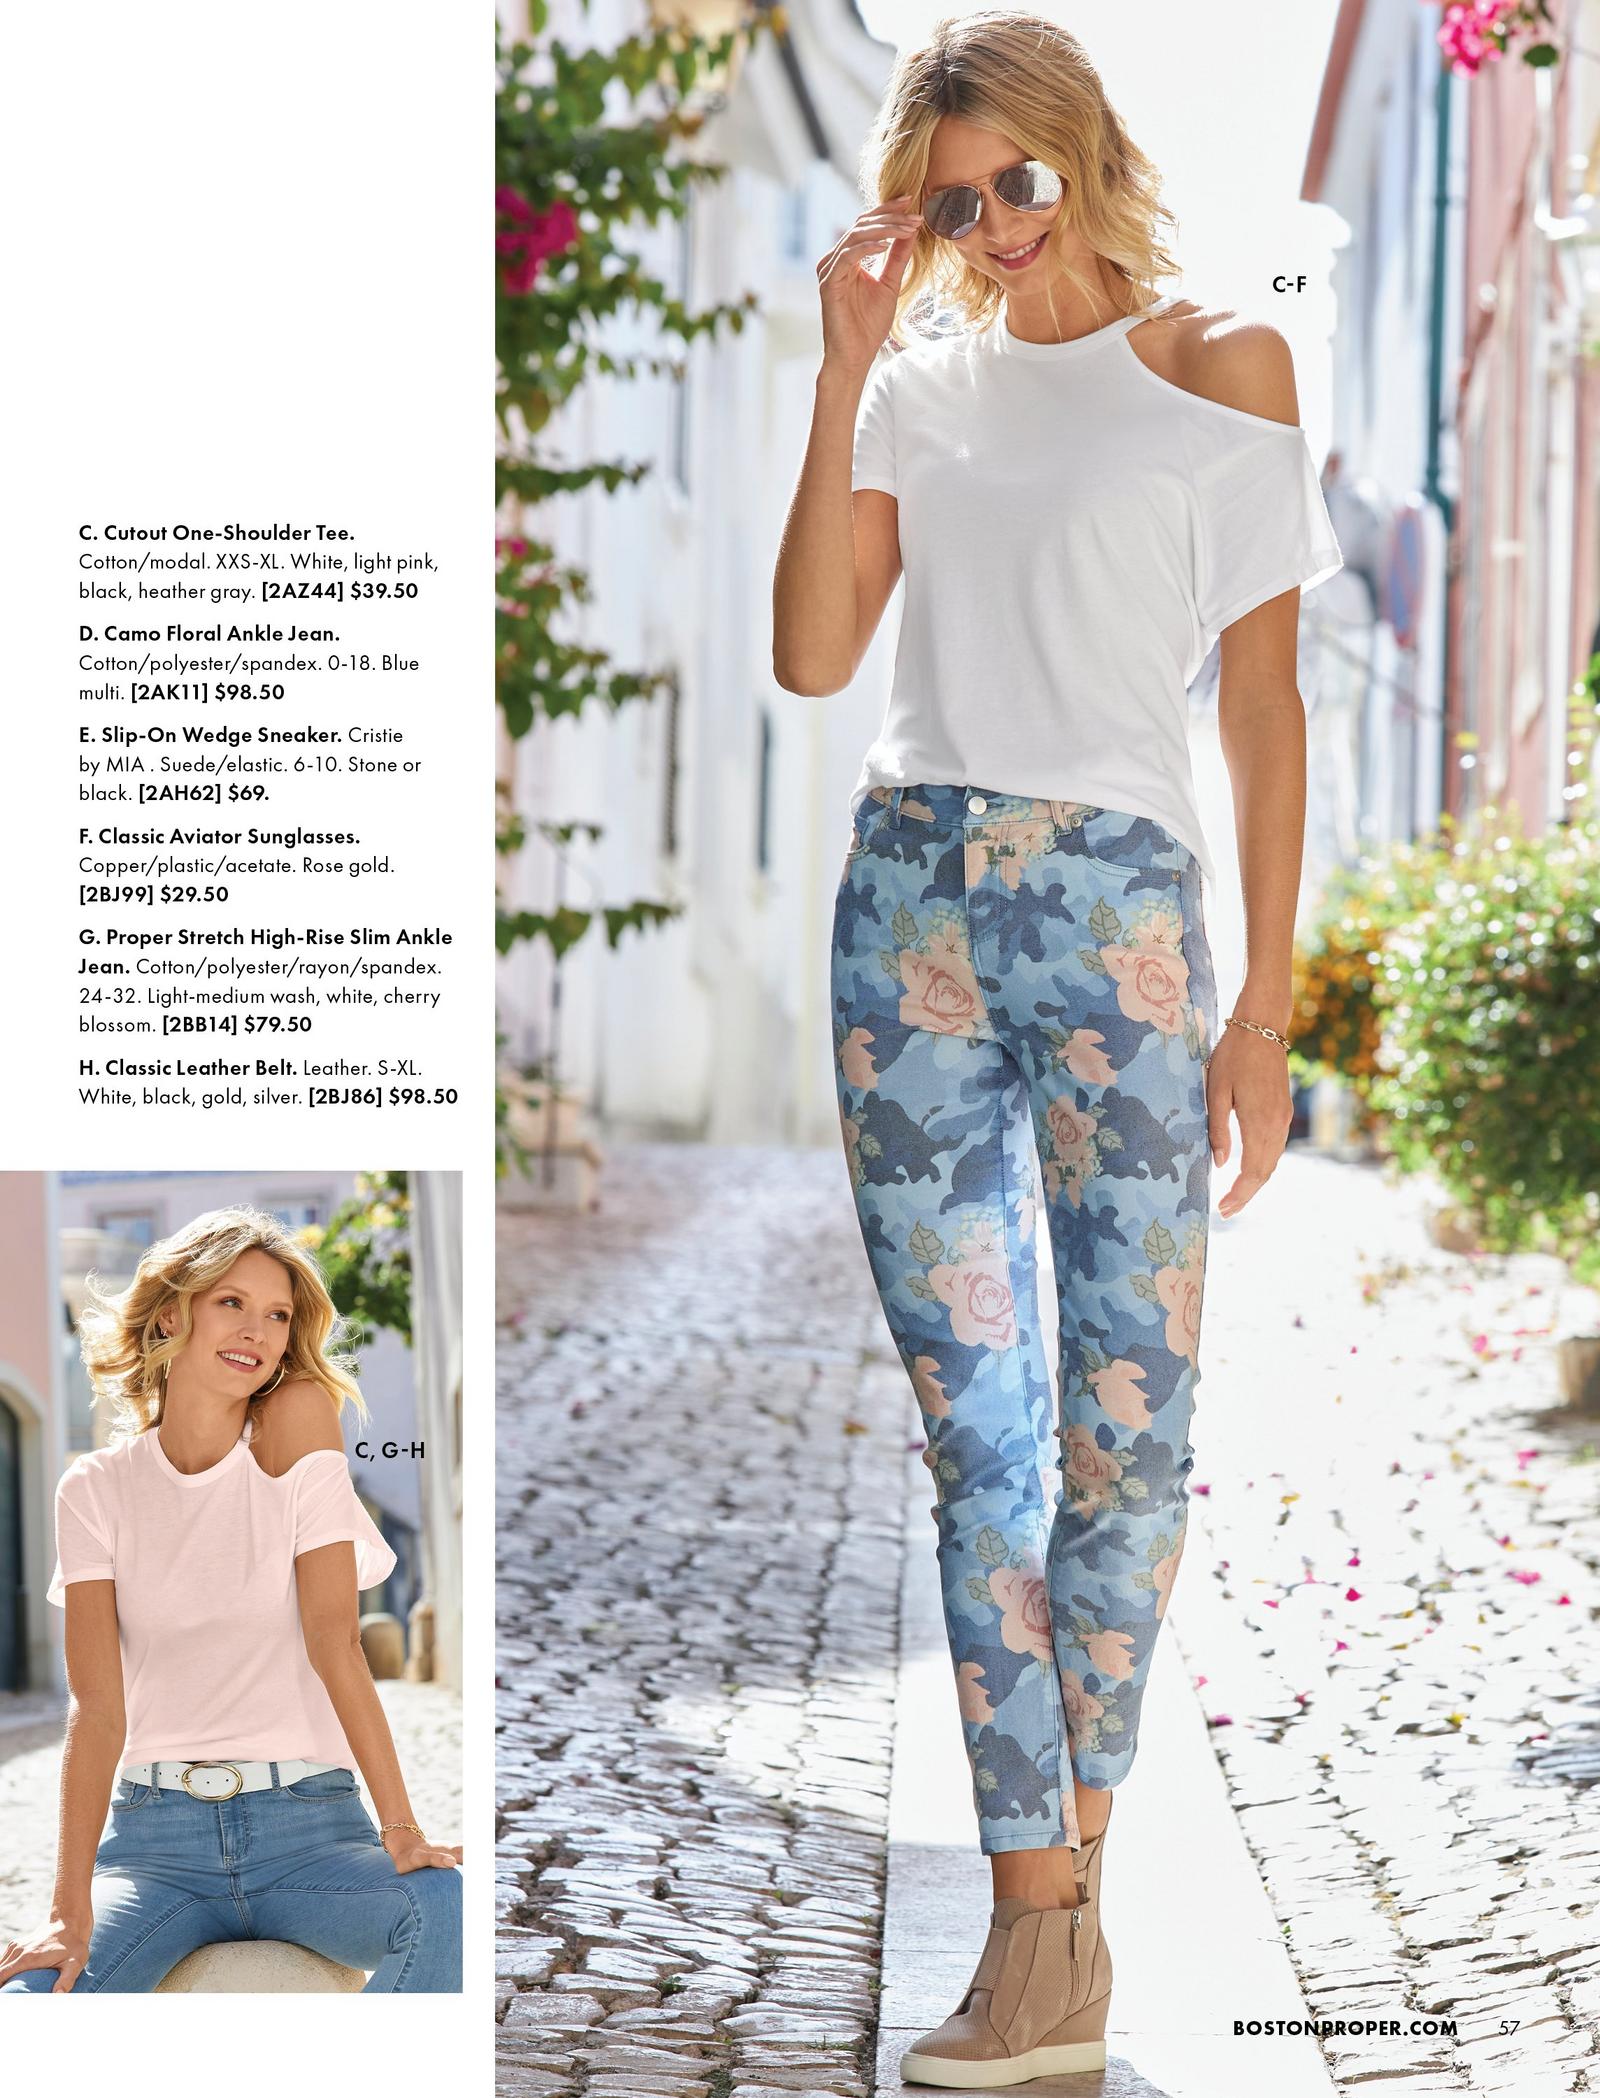 left model wearing a light pink cutout one-shoulder tee, white belt, and jeans. right model wearing a white cutout one-shoulder tee, camo floral ankle jeans, tan sneaker wedges, and aviator sunglasses.